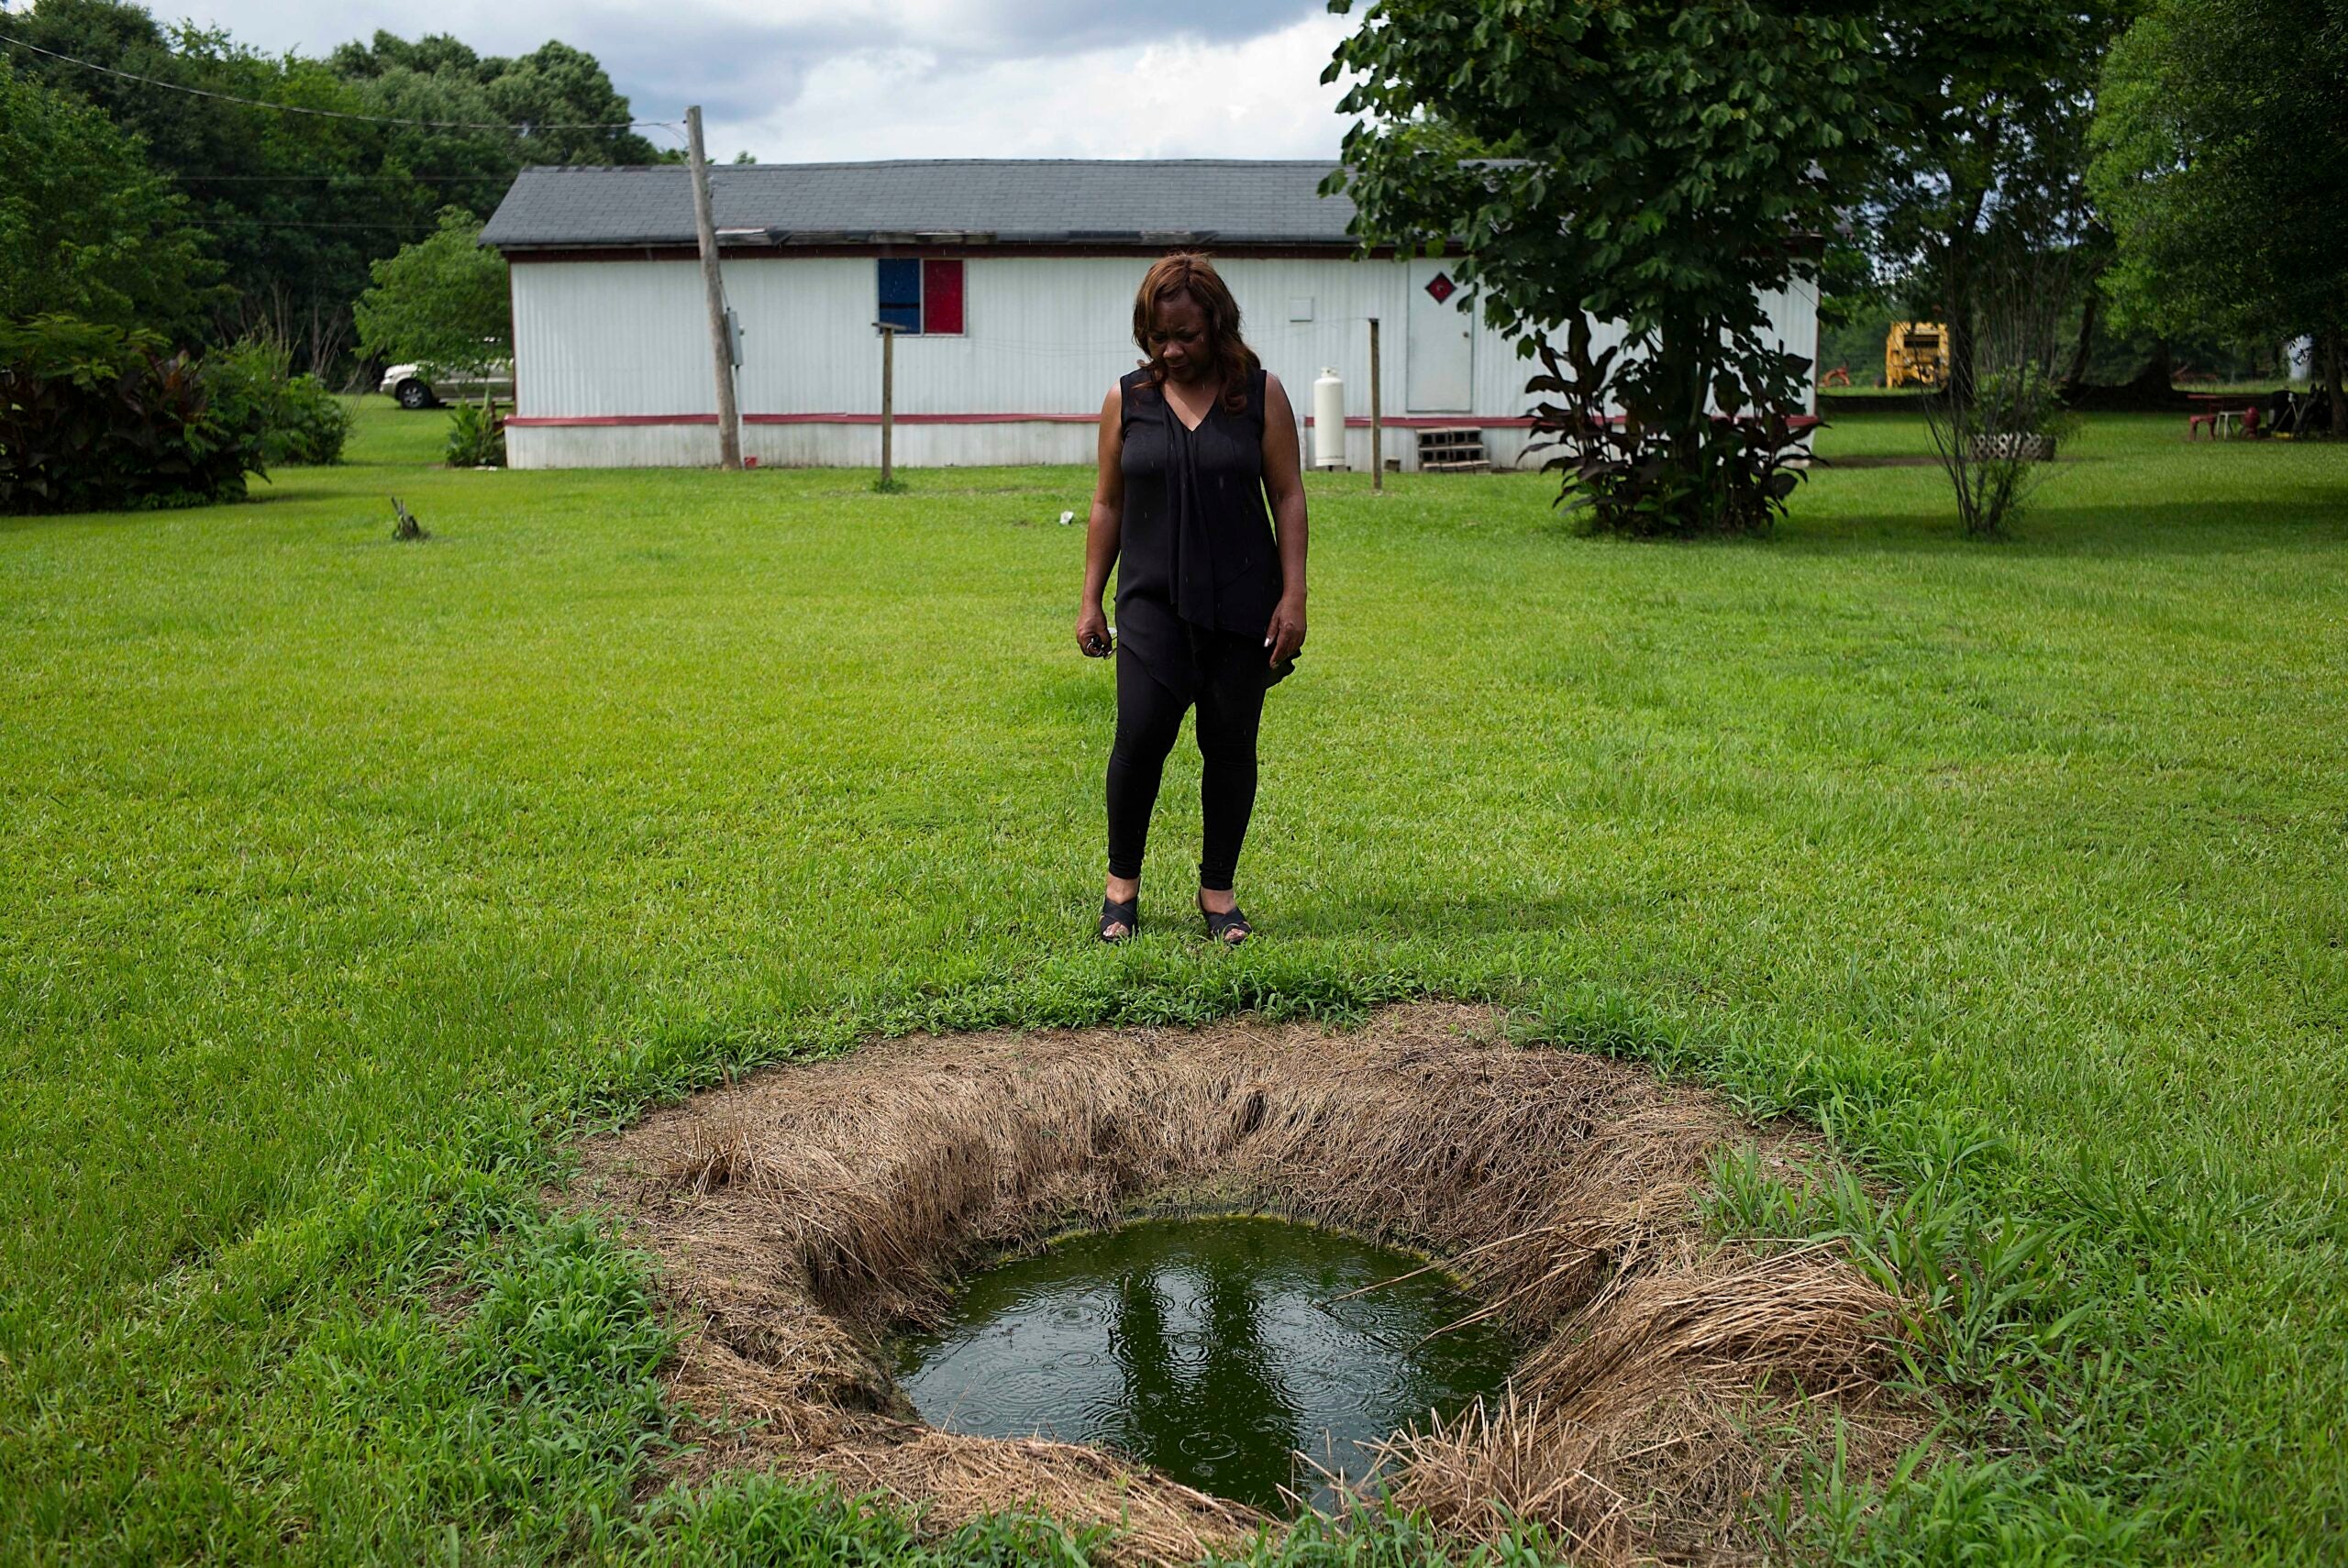 Catherine Coleman Flowers stands over a pool of raw sewage outside a home in White Hall, Alabama. For over a decade Flowers has worked as an advocate in the Black Belt, where improper sewage treatment has put the population at risk of infectious diseases.
(Bob Miller / Redux)